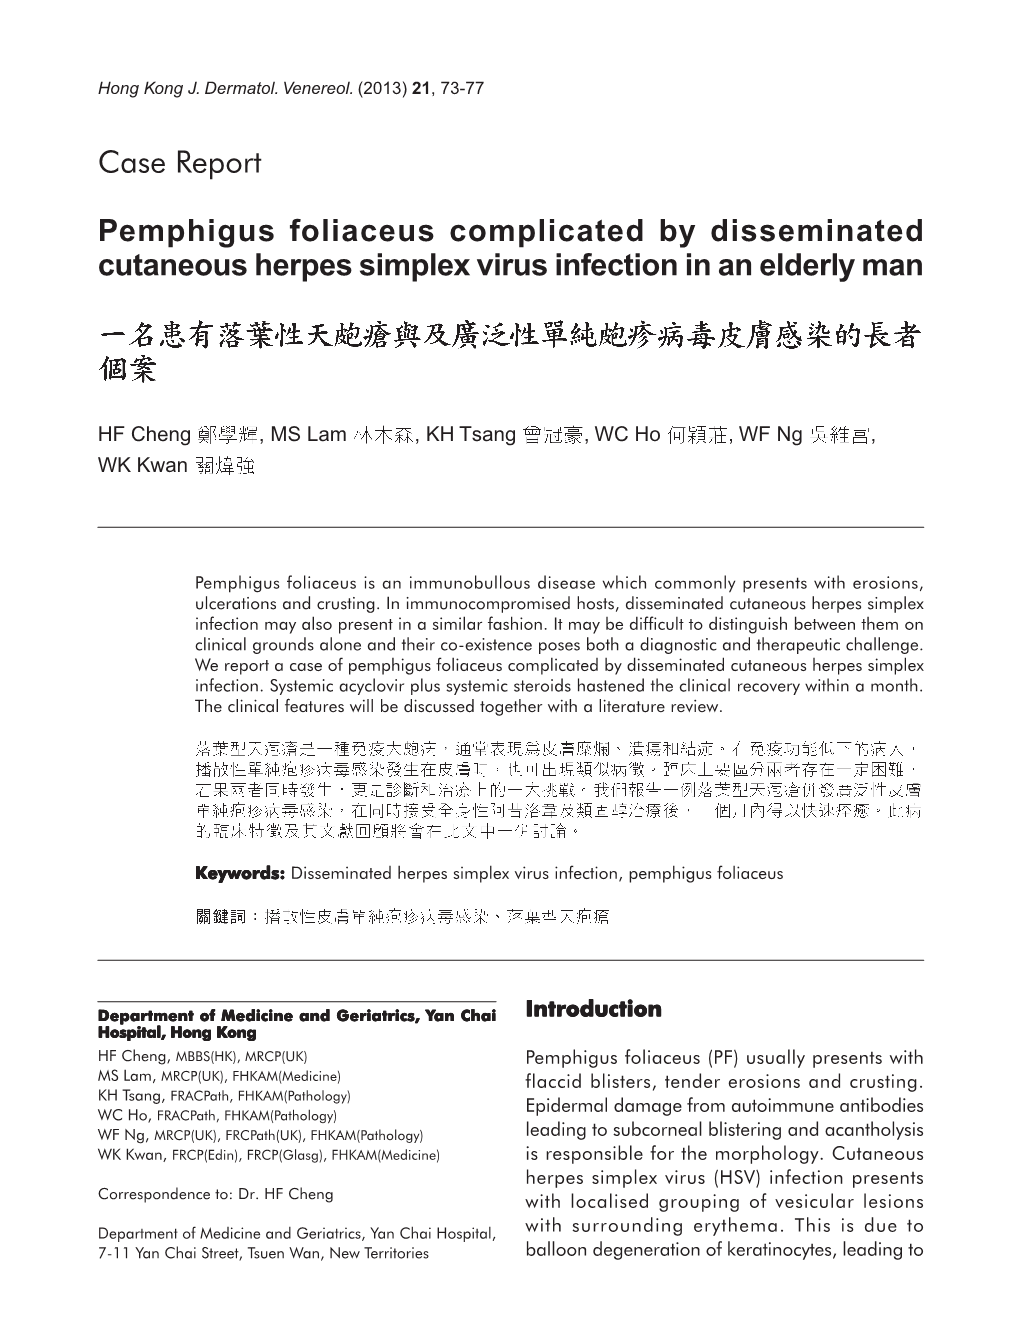 Case Report Pemphigus Foliaceus Complicated by Disseminated